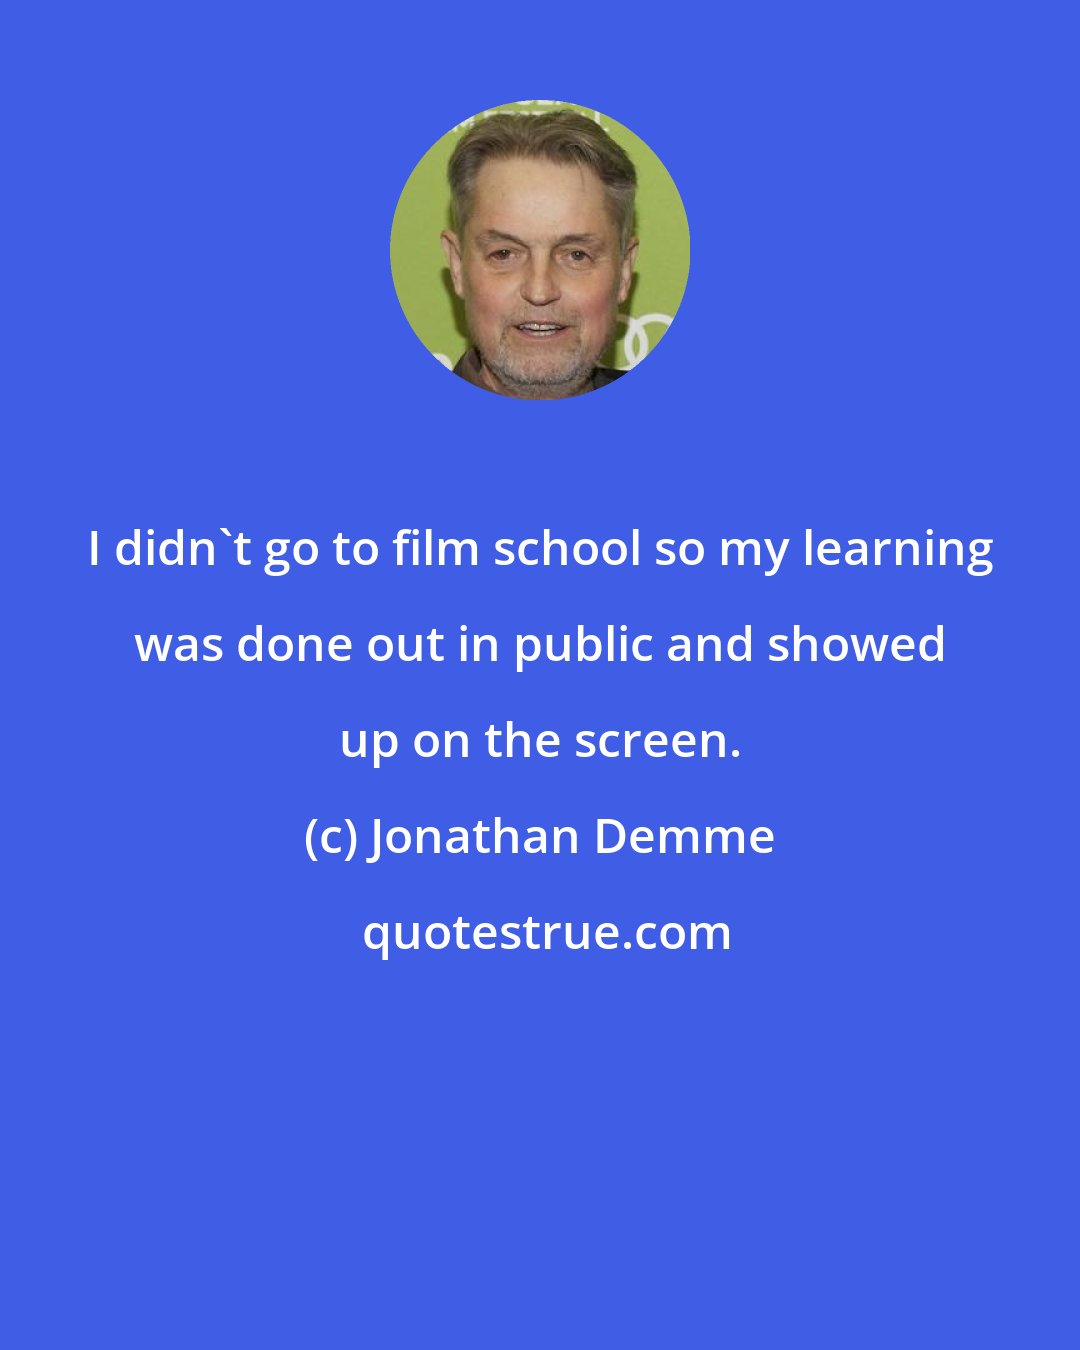 Jonathan Demme: I didn't go to film school so my learning was done out in public and showed up on the screen.